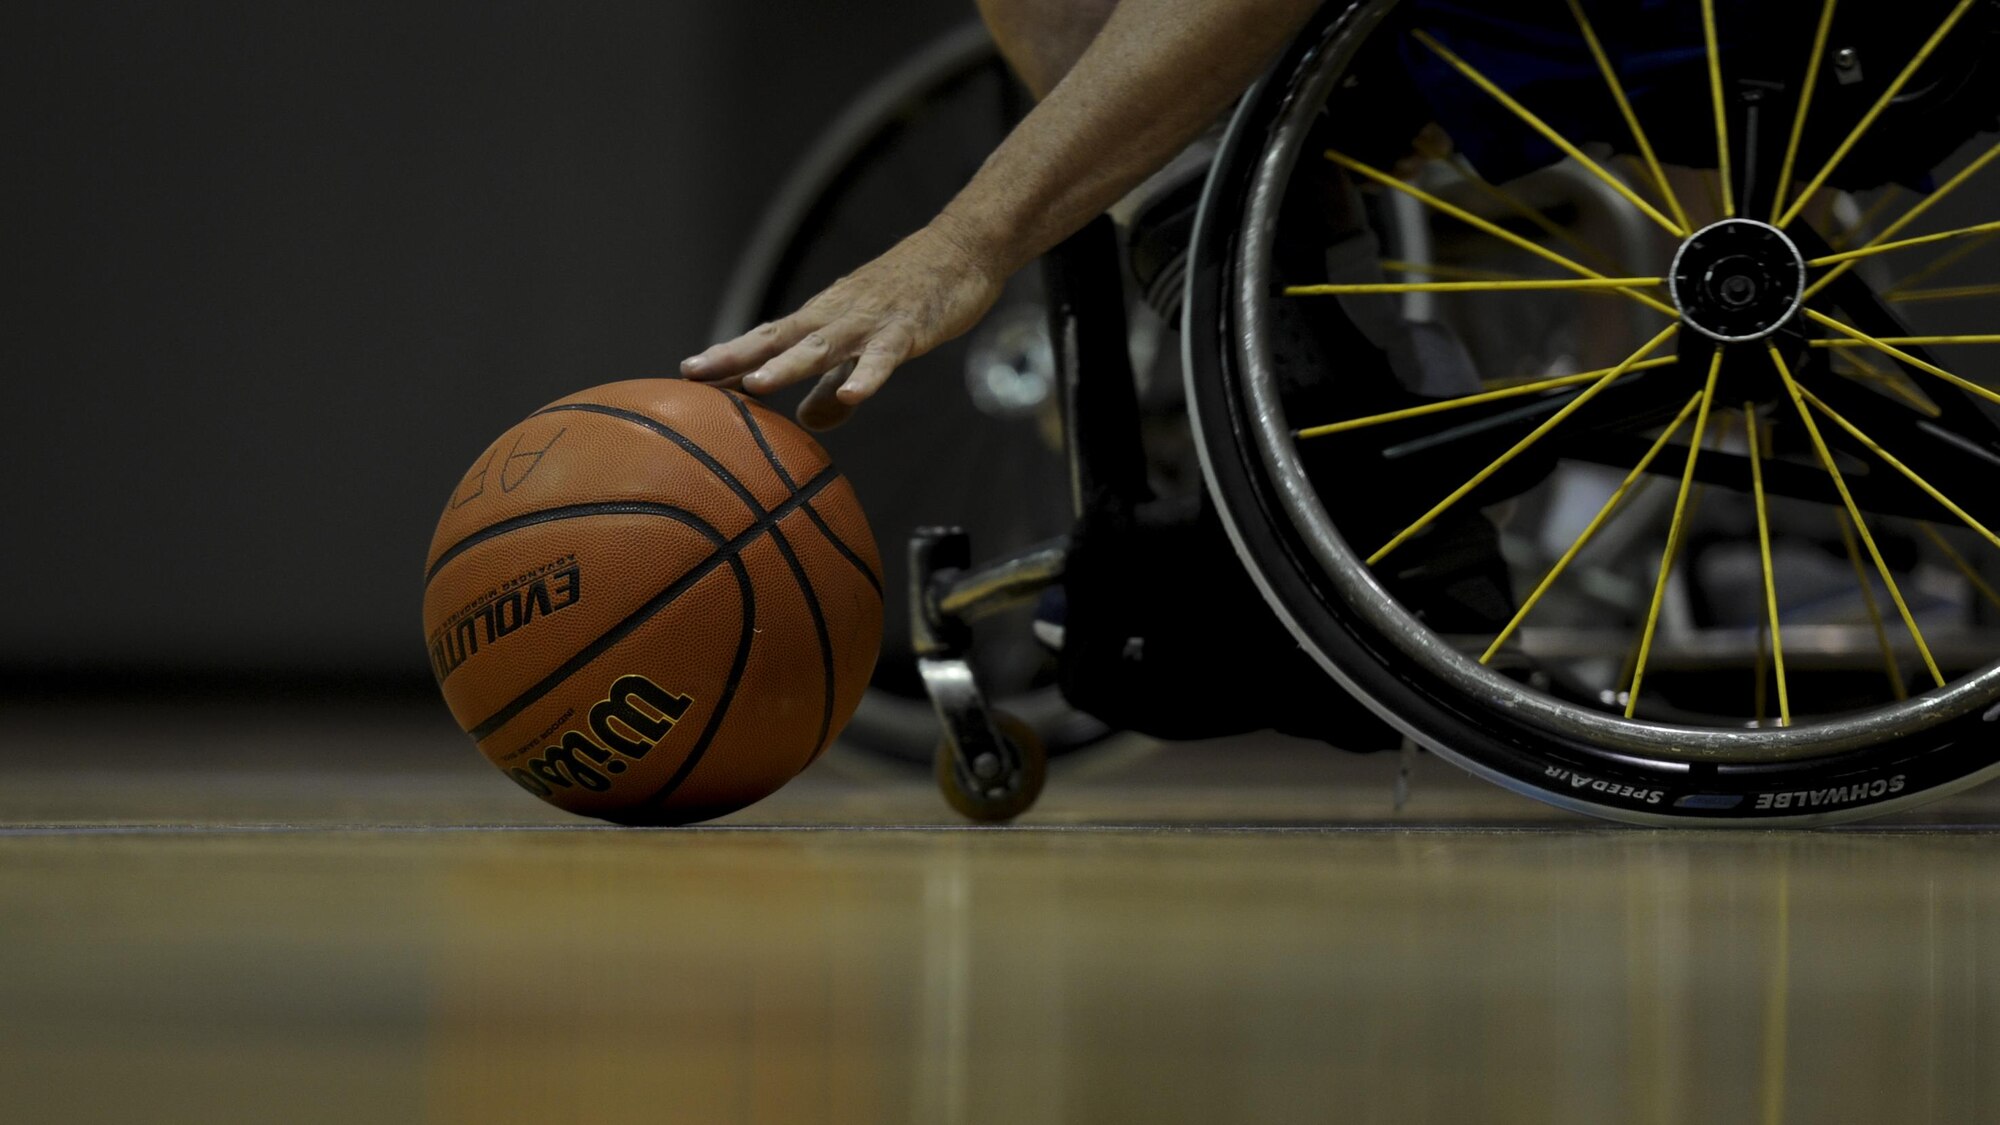 Jerry Terry, the assistant coach of the Air Force wheelchair basketball team, picks up a basketball during practice at Hurlburt Field, Fla., April 24, 2017. This Terry’s first year coaching with the team. (U.S. Air Force photo by Airman 1st Class Dennis Spain)